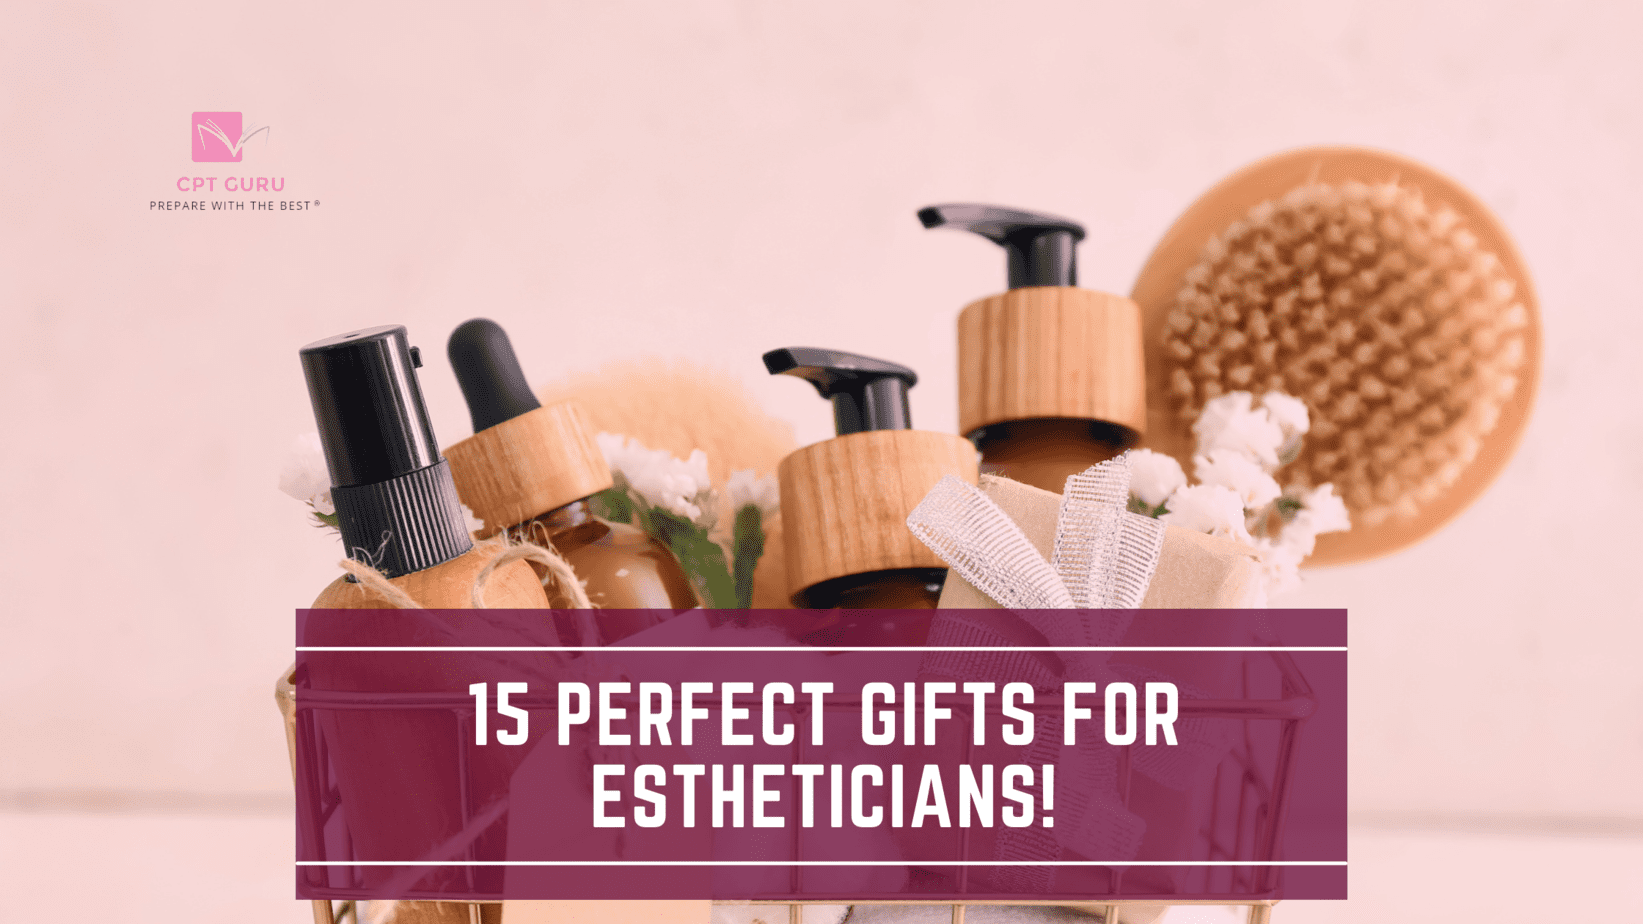 15 perfect gifts for estheticians!